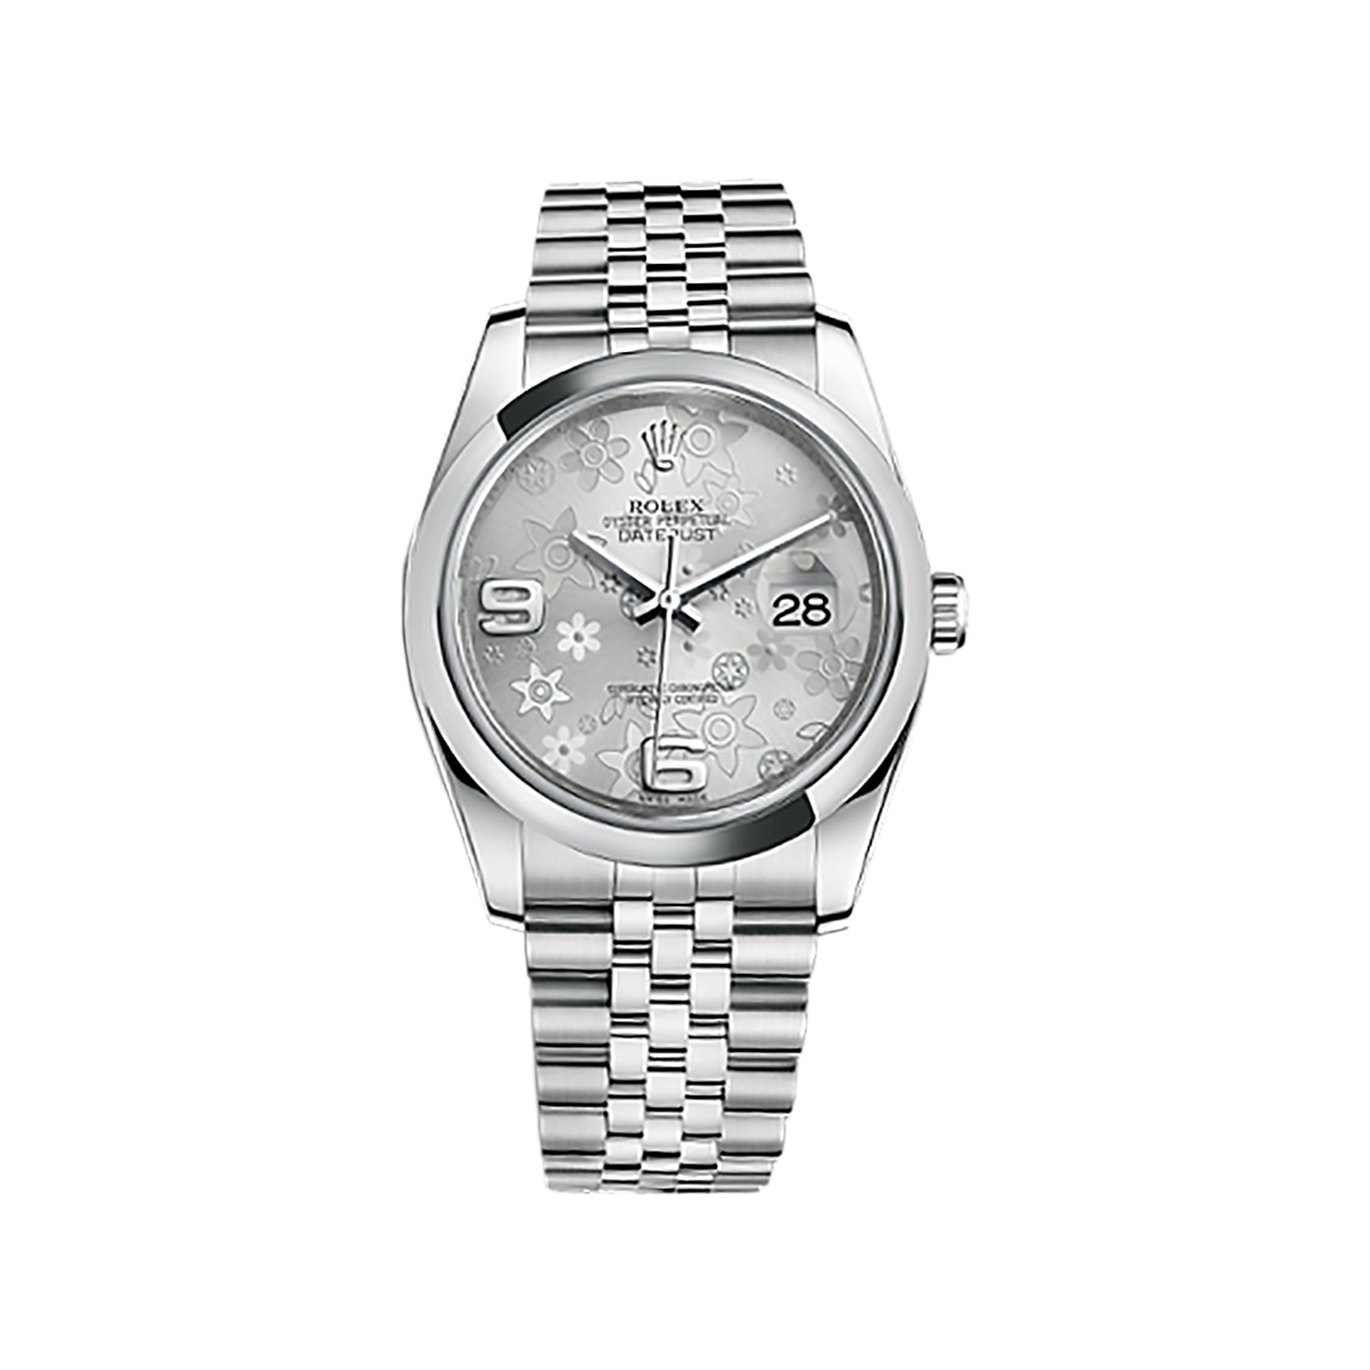 Datejust 36 116200 Stainless Steel Watch (Silver Floral Motif)